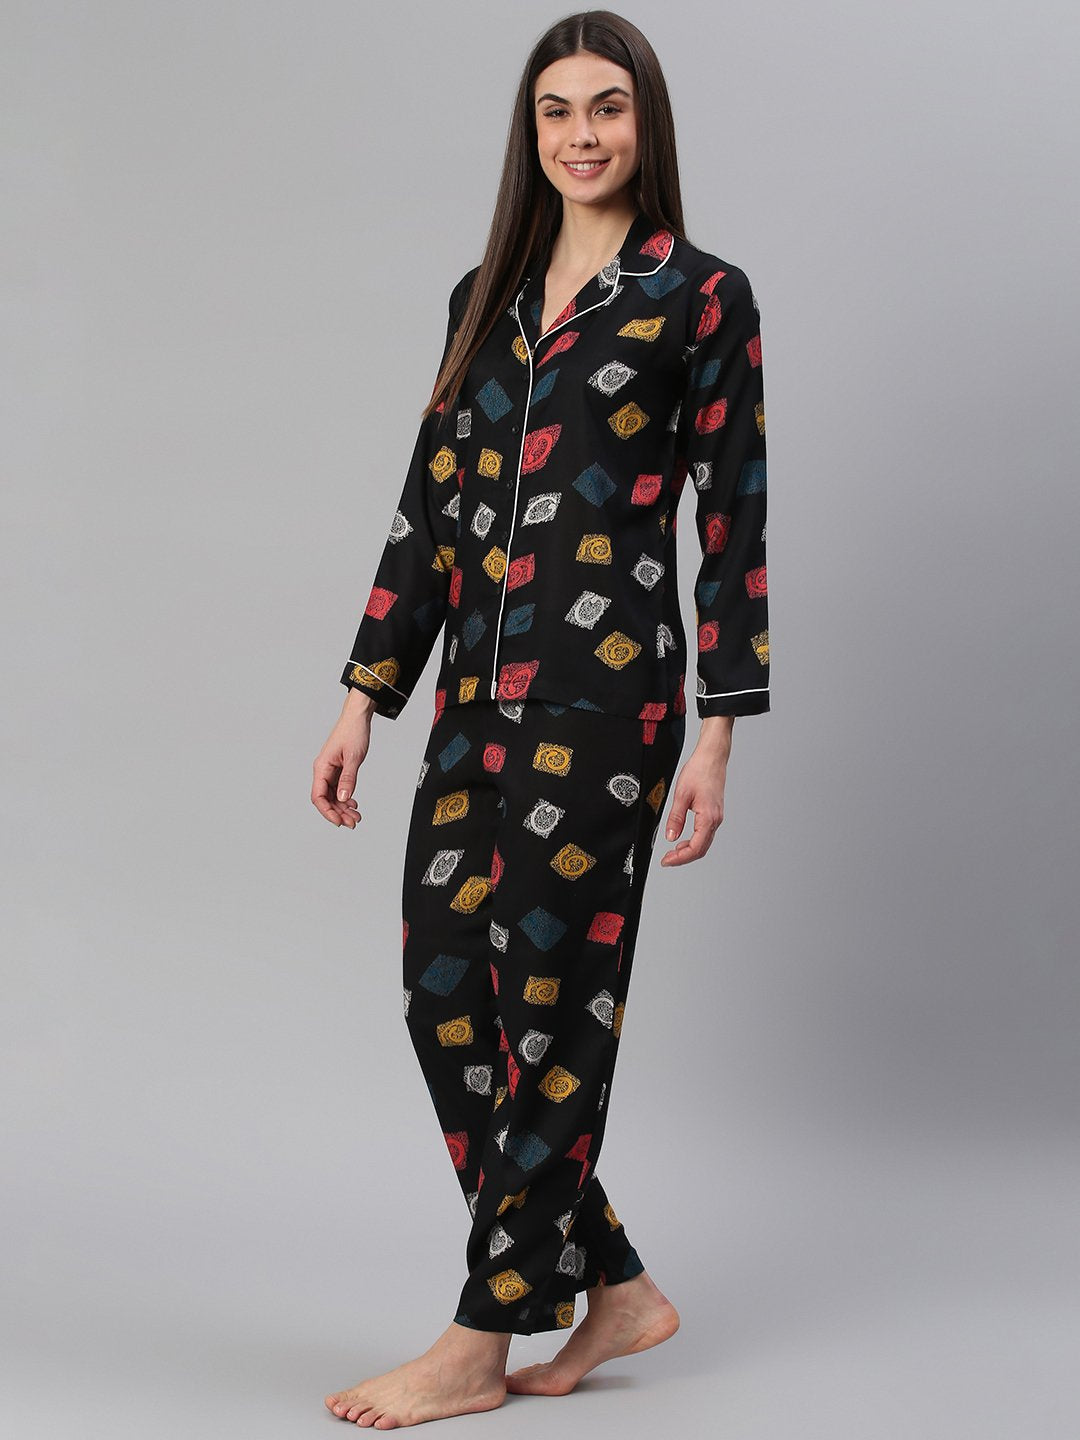 Cation Black Printed Night Suit